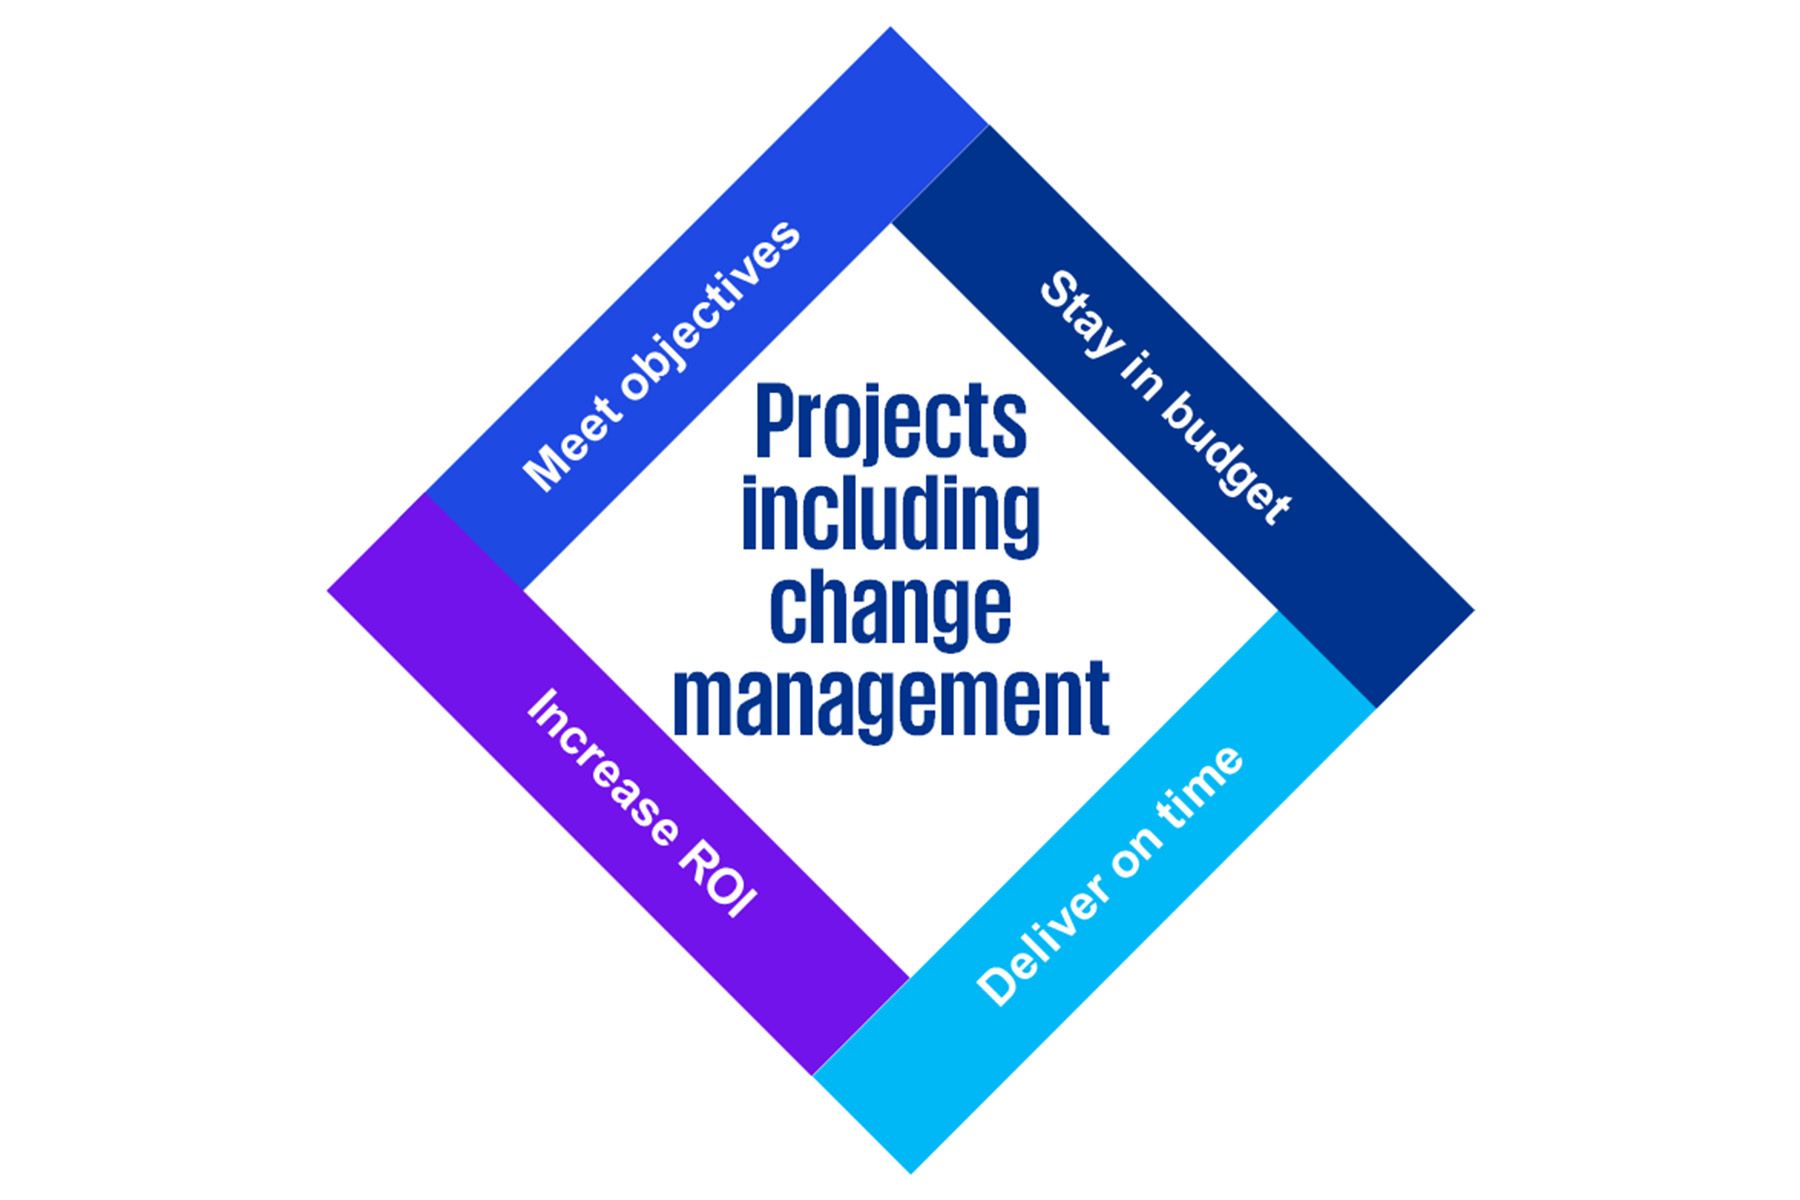 Projects including change management - Why Change Management is important